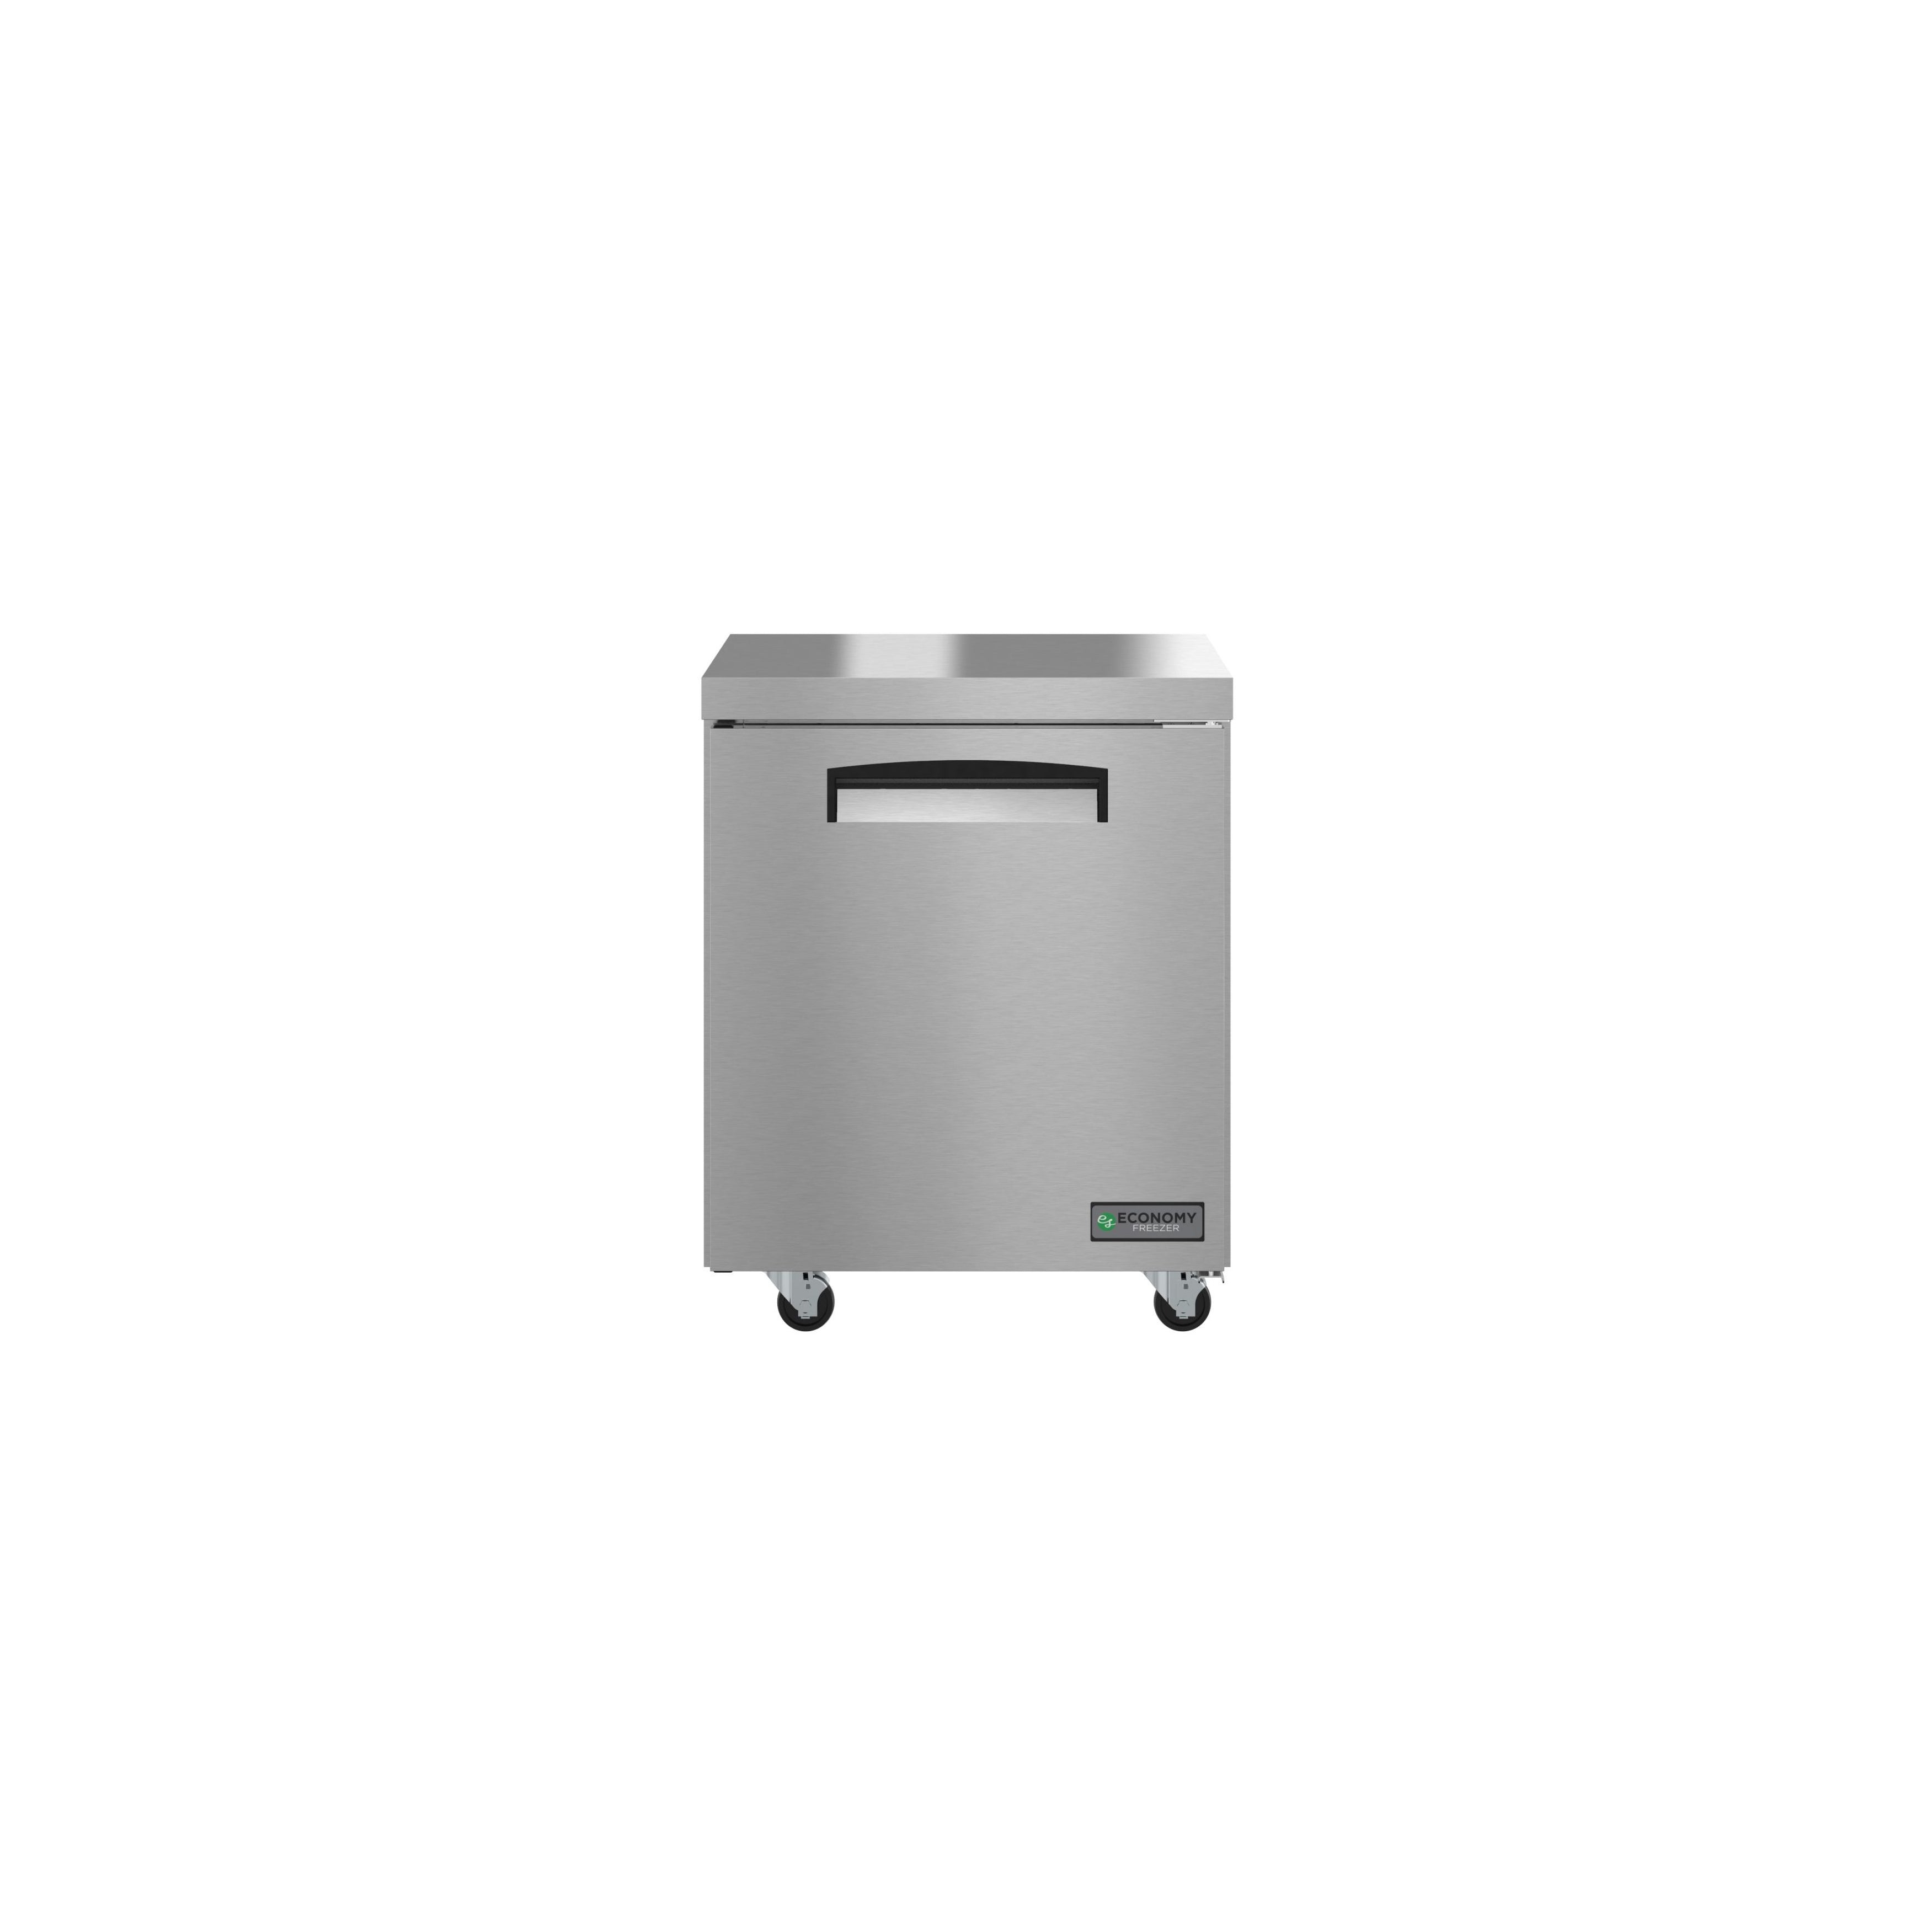 Hoshizaki - EUF27A, Commercial 27" Single Section Undercounter Freezer Stainless Door 6.33cu,ft,